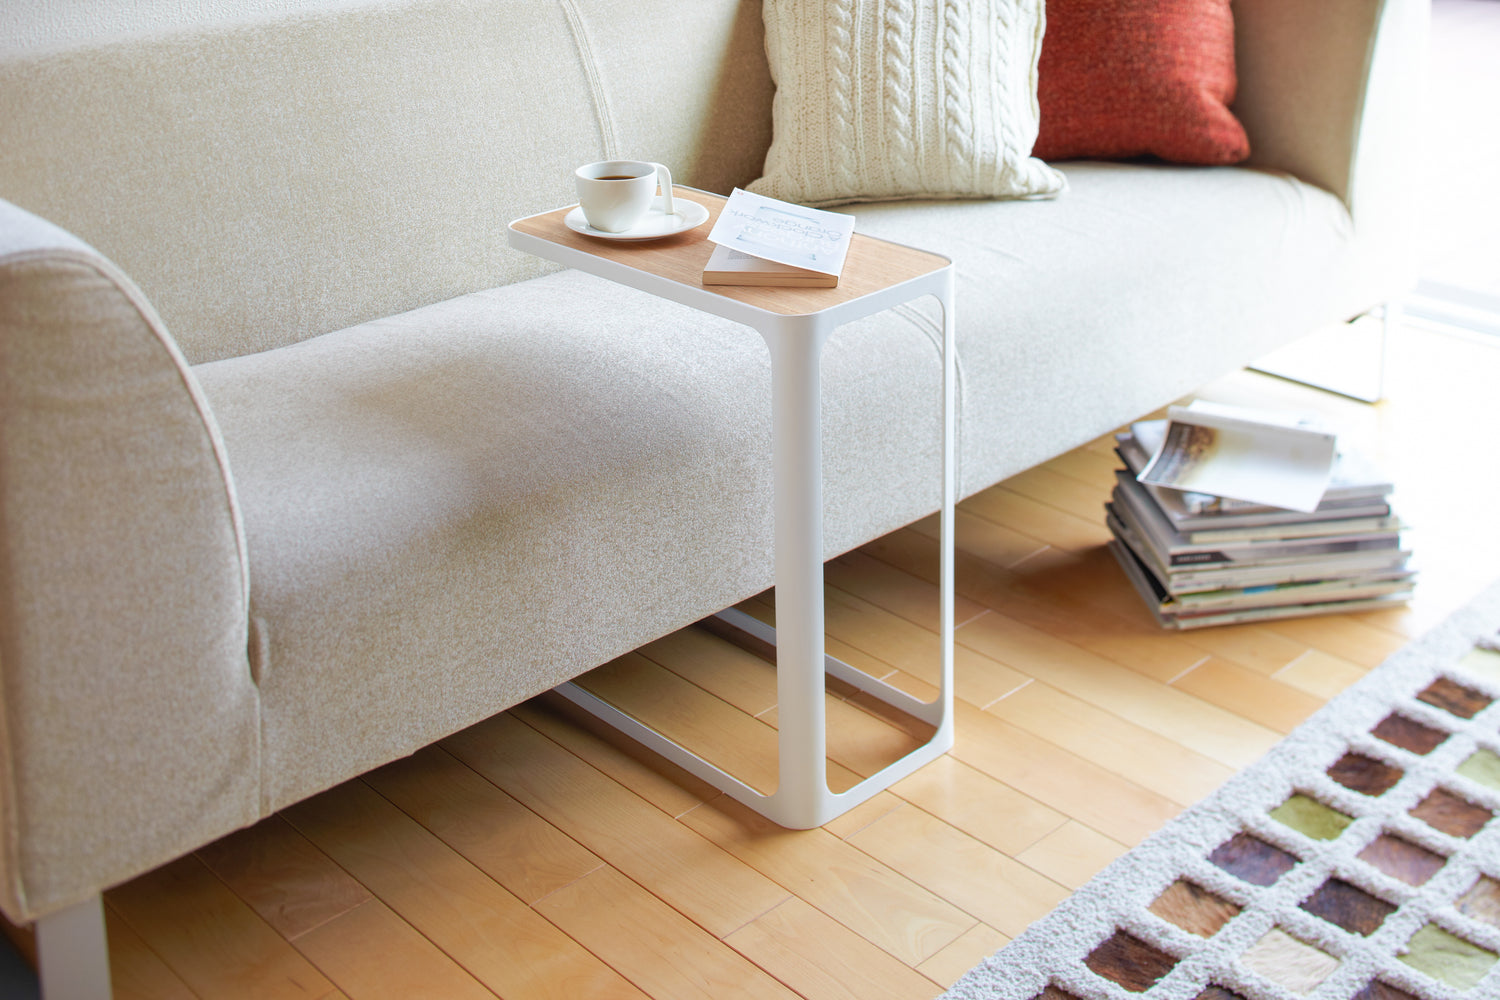 View 3 - White C Side Table displaying coffee cup and book in living room by Yamazaki Home.